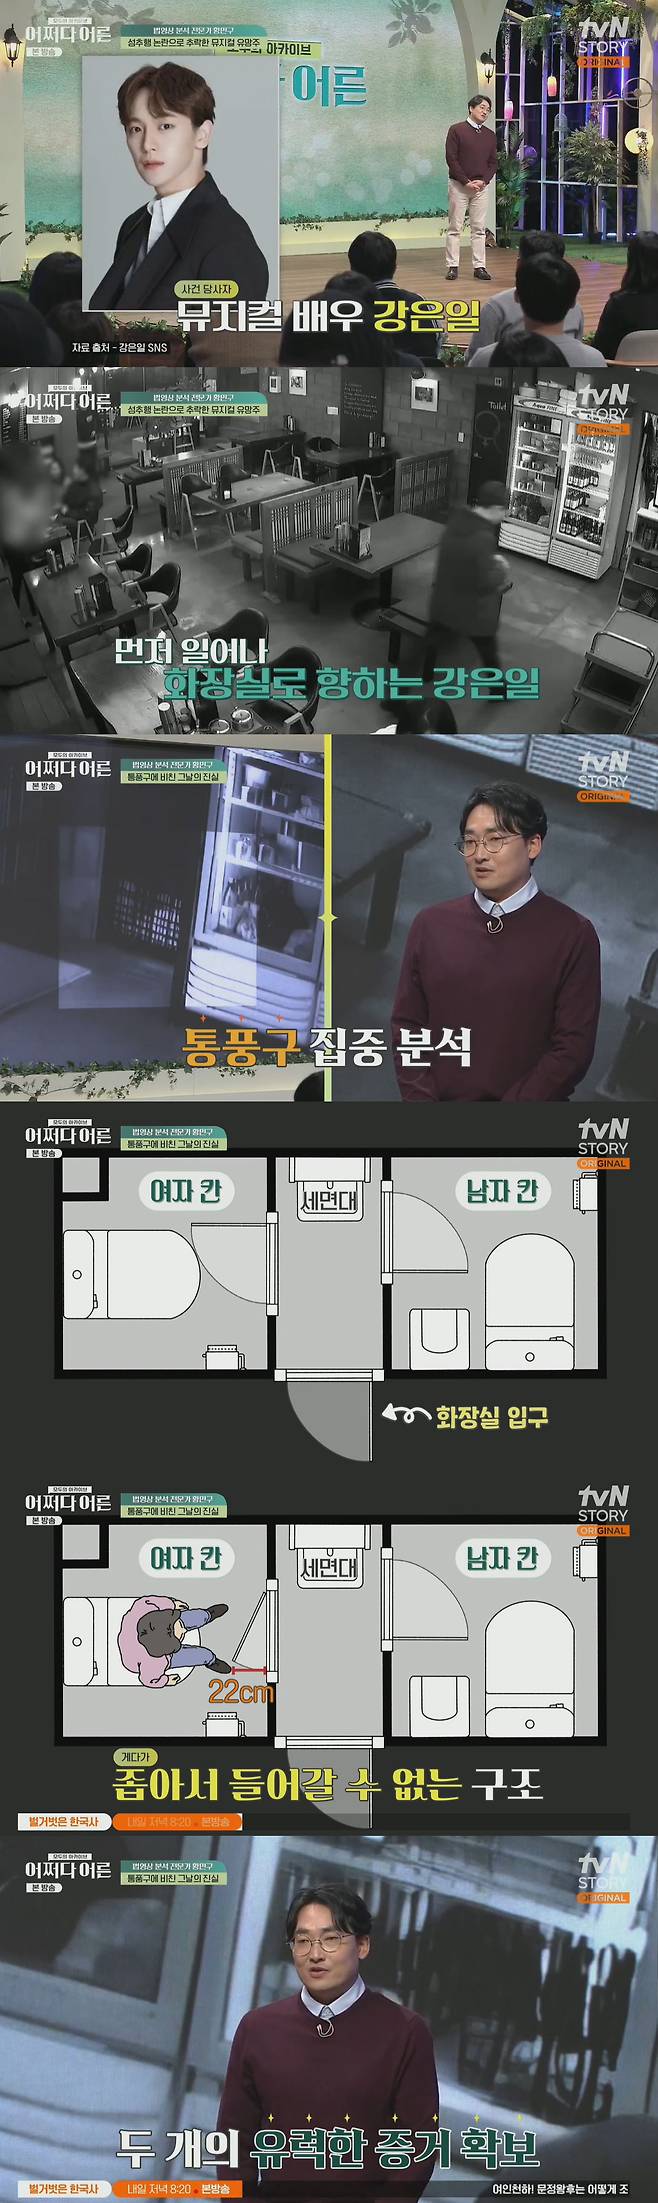 In tvN STORY What if adult broadcasted on the 14th, Hwang Min-gu appeared and talked about thousand witnesses with truth.Hwang Min-gu said, Due to the universal CCTV installation, requests for video analysis of sexual harassment cases suddenly surged tremendously. Ten years ago, there were only about two cases of sexual harassment a year.Nowadays, however, one case comes in a month or two. Among the many sexual harassment cases, there are some genuine sexual harassment people and some unjust people.Todays story is the story of a person who wrote An Innocent Man unfairly. In 2019, a middle-aged man came to Hwang Min-gu and asked his nephew to take off Sexual Harassment An Innocent Man. The party involved in the case was Kang Eun-il.He was in jail for six months as a sexual harassment man.Hwang Min-gu said, More than 80% of all incidents start with alcohol. And at dawn. This incident also happened at a drinking party between 3 and 4 a.m. Kang Eun-il and four acquaintances, including two women, drank.One of them reported that he had been subjected to sexual harassment by Kang Eun-il in restroom.At the time, Kang Eun-il claimed, I entered the restroom first and came out of the mens compartment and was washing my hands in the sink when a woman came out and hugged me from behind and molested me. The woman said, Do you live well in your house?I do not know who is talking about it, he said.He added, The video may be different from the one you memorized. If you keep brooding over the memory, sometimes it becomes something that never happened. And sometimes you ignore the truth, saying you dont know why this is in the video.So I dont believe in Memory, but the video speaks the truth.At the time, the only evidence was the CCTV in the store. I couldnt see inside the restroom. But something interesting was found on the CCTV, he said, revealing CCTV footage of the incident.In the video, Kang Eun-il got up from his seat first after drinking alcohol and walked toward the restroom, and immediately a woman followed Kang Eun-il.But under the restroom door, there was a barrel, and the legs of two people shone.Hwang Min-gu said, If there was no vent underneath, I was guilty. That vent saved Kang Eun-il. I analyzed the structure of the restroom through the vent. When I opened the door, the restroom compartment was divided into a woman and a man.If Kang Eun-il entered the womens compartment as the woman claimed, he should have seen the foot between the vents, but he did not. Only the womans foot was caught. The statement was wrong.And the womens restroom is narrow, so when you open the door, the door touches your knees. These two evidences are very strong evidences.Most sexual harassment cases prioritize the victims statement, so I thought it was hopeless because it was hard to get out without clear evidence, but I was confident that I could win the moment I found it.Even when Kang Eun-il tried to open the door, she was identified several times as a woman pulling her clothes. Kang Eun-il was kicked out of his agency after the incident, and several of his contracted works were canceled, causing Kang Eun-il to become depressed.Hwang Min-gu said, I was sentenced to six months in the first trial, lived for five months, and was released after being acquitted in the second trial. Im starting my activities again now. Isnt it too unfair?Im so angry, I was angry.